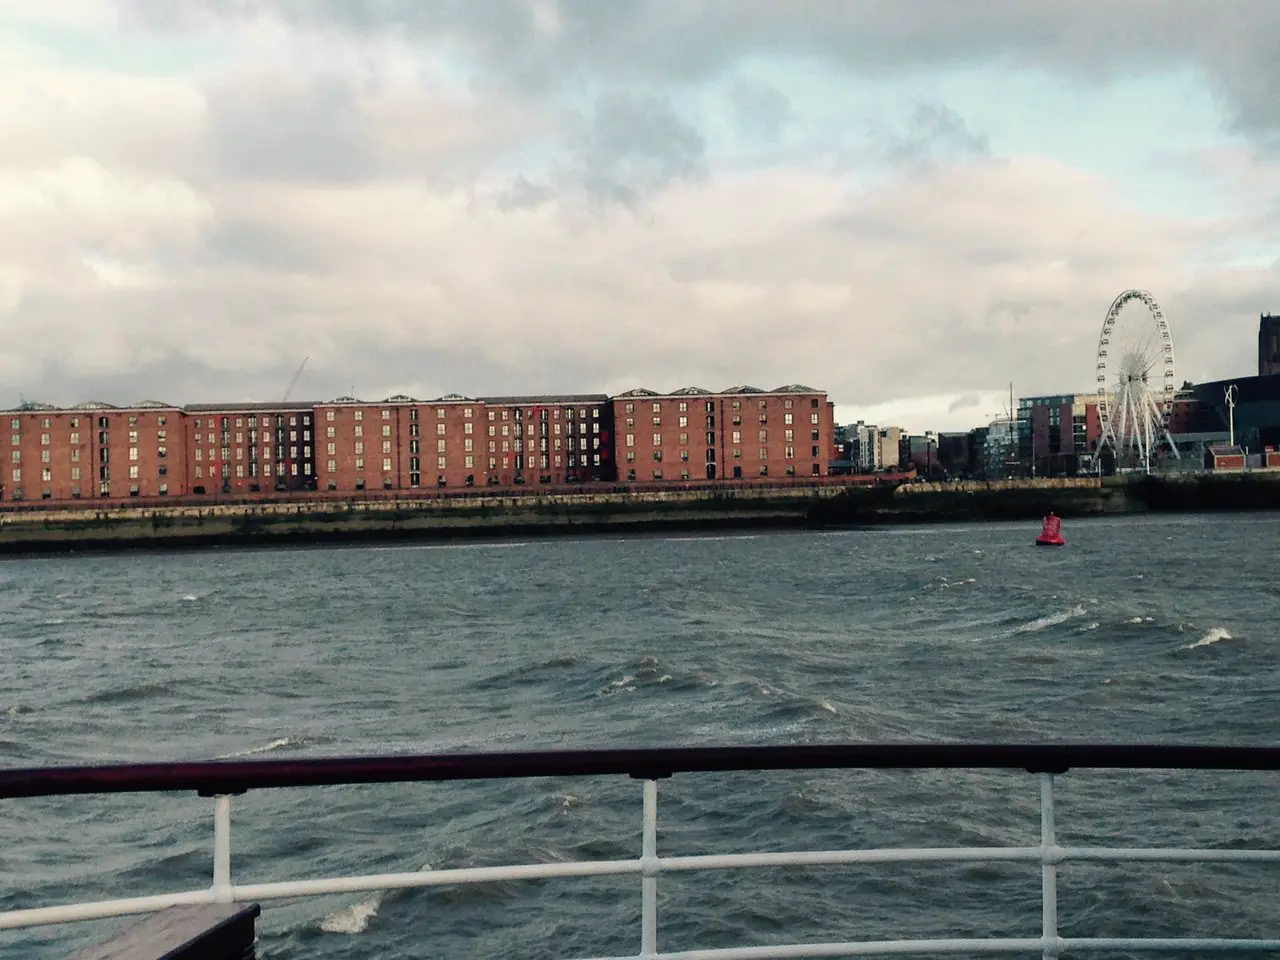 View of the Albert Dock from a boat tour on the River Mersey. It's a dark and stormy day in winter.